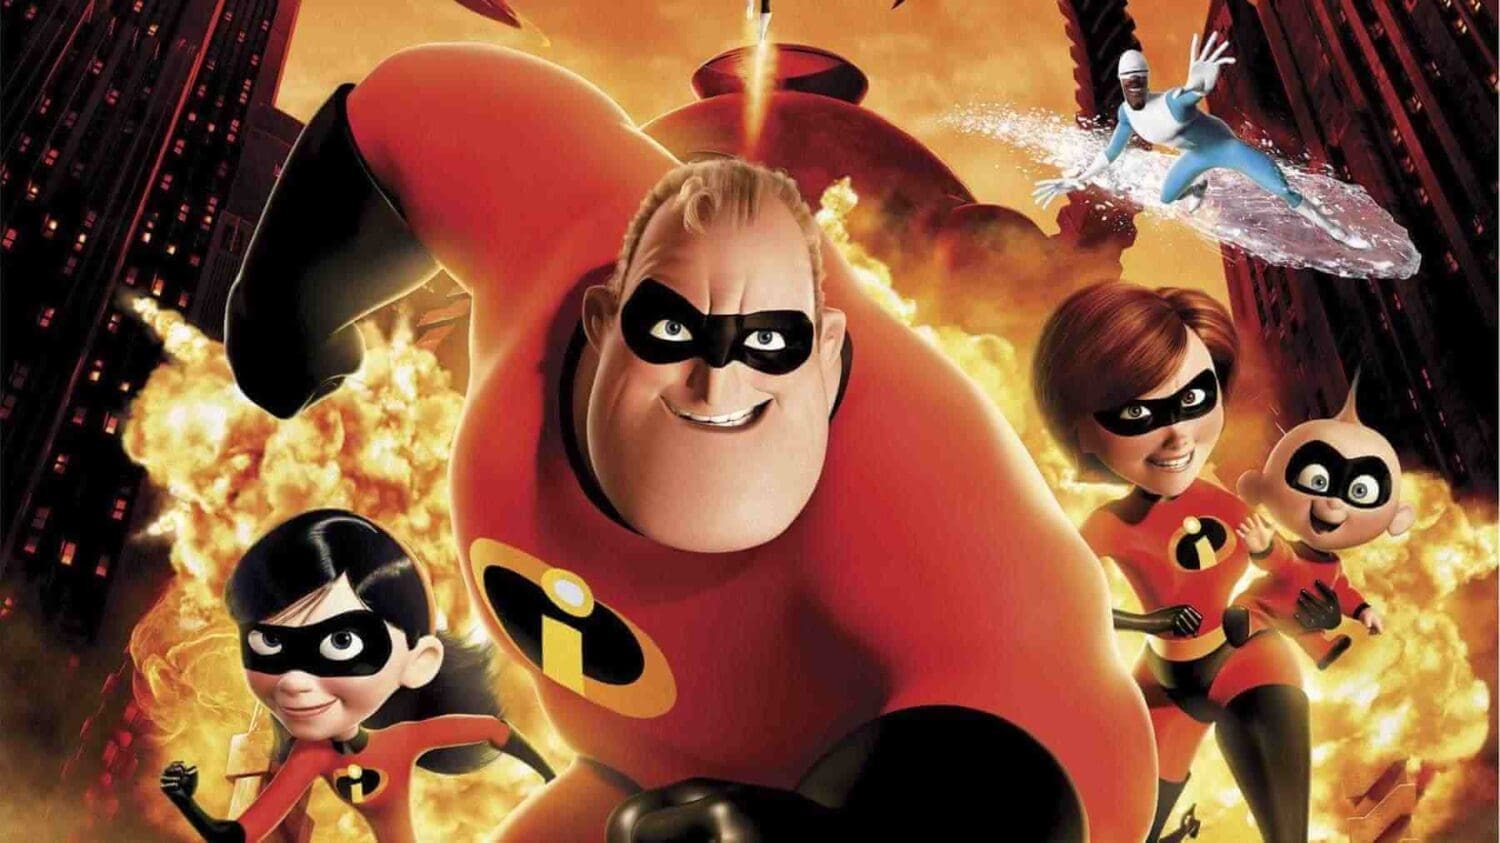 mr incredible from The Incredibles Movies